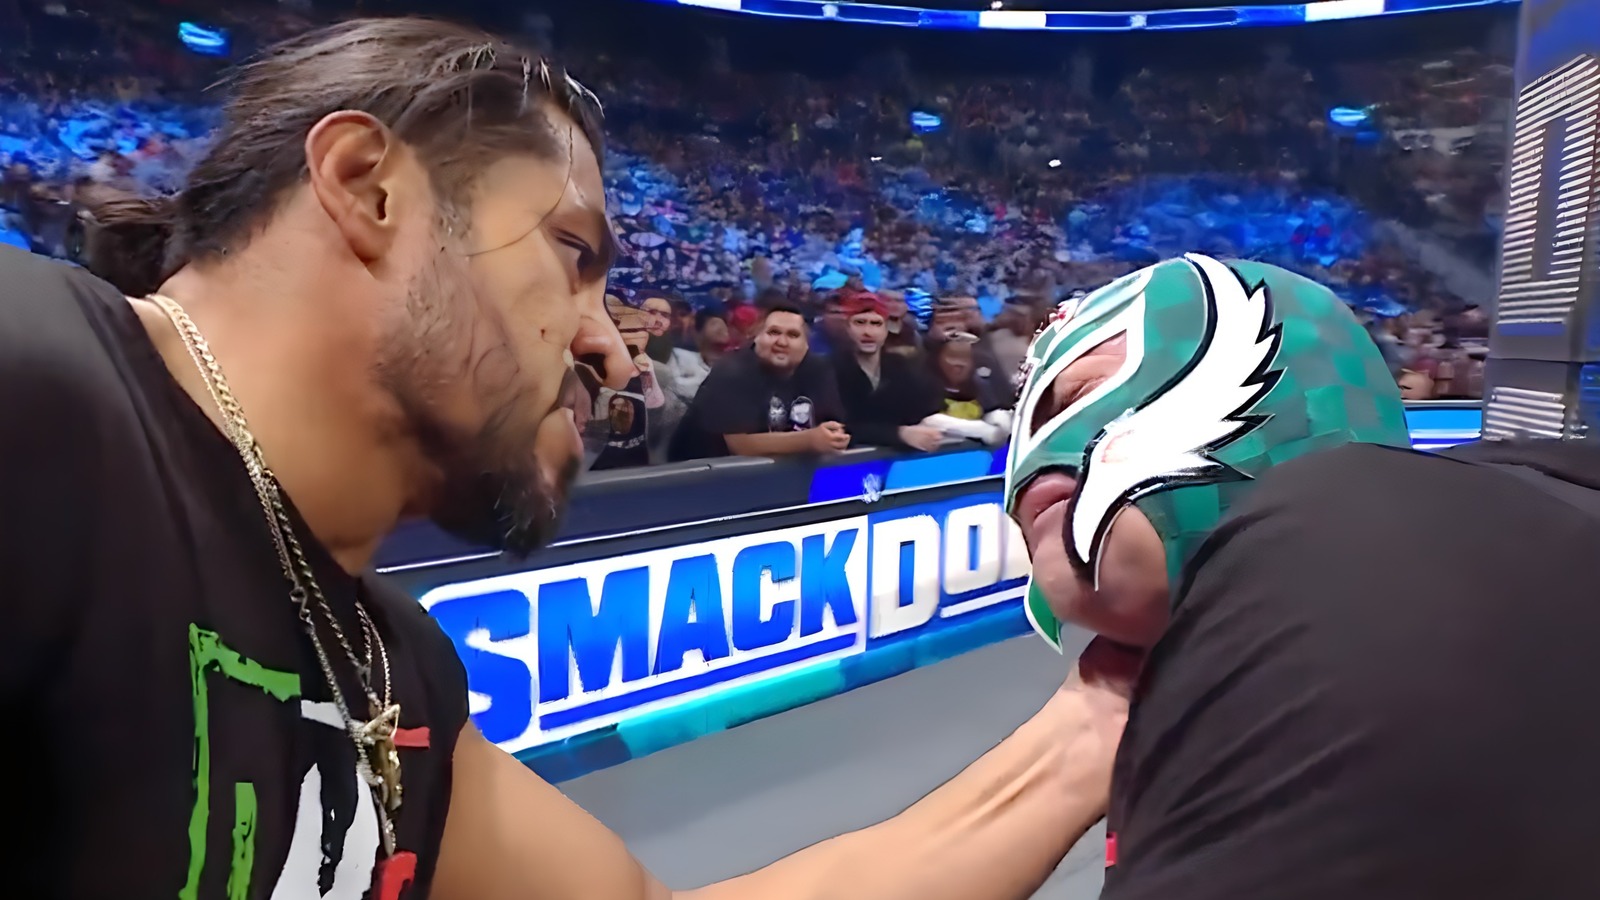 Santos Escobar Turns Heel By Attacking Rey Mysterio On WWE SmackDown